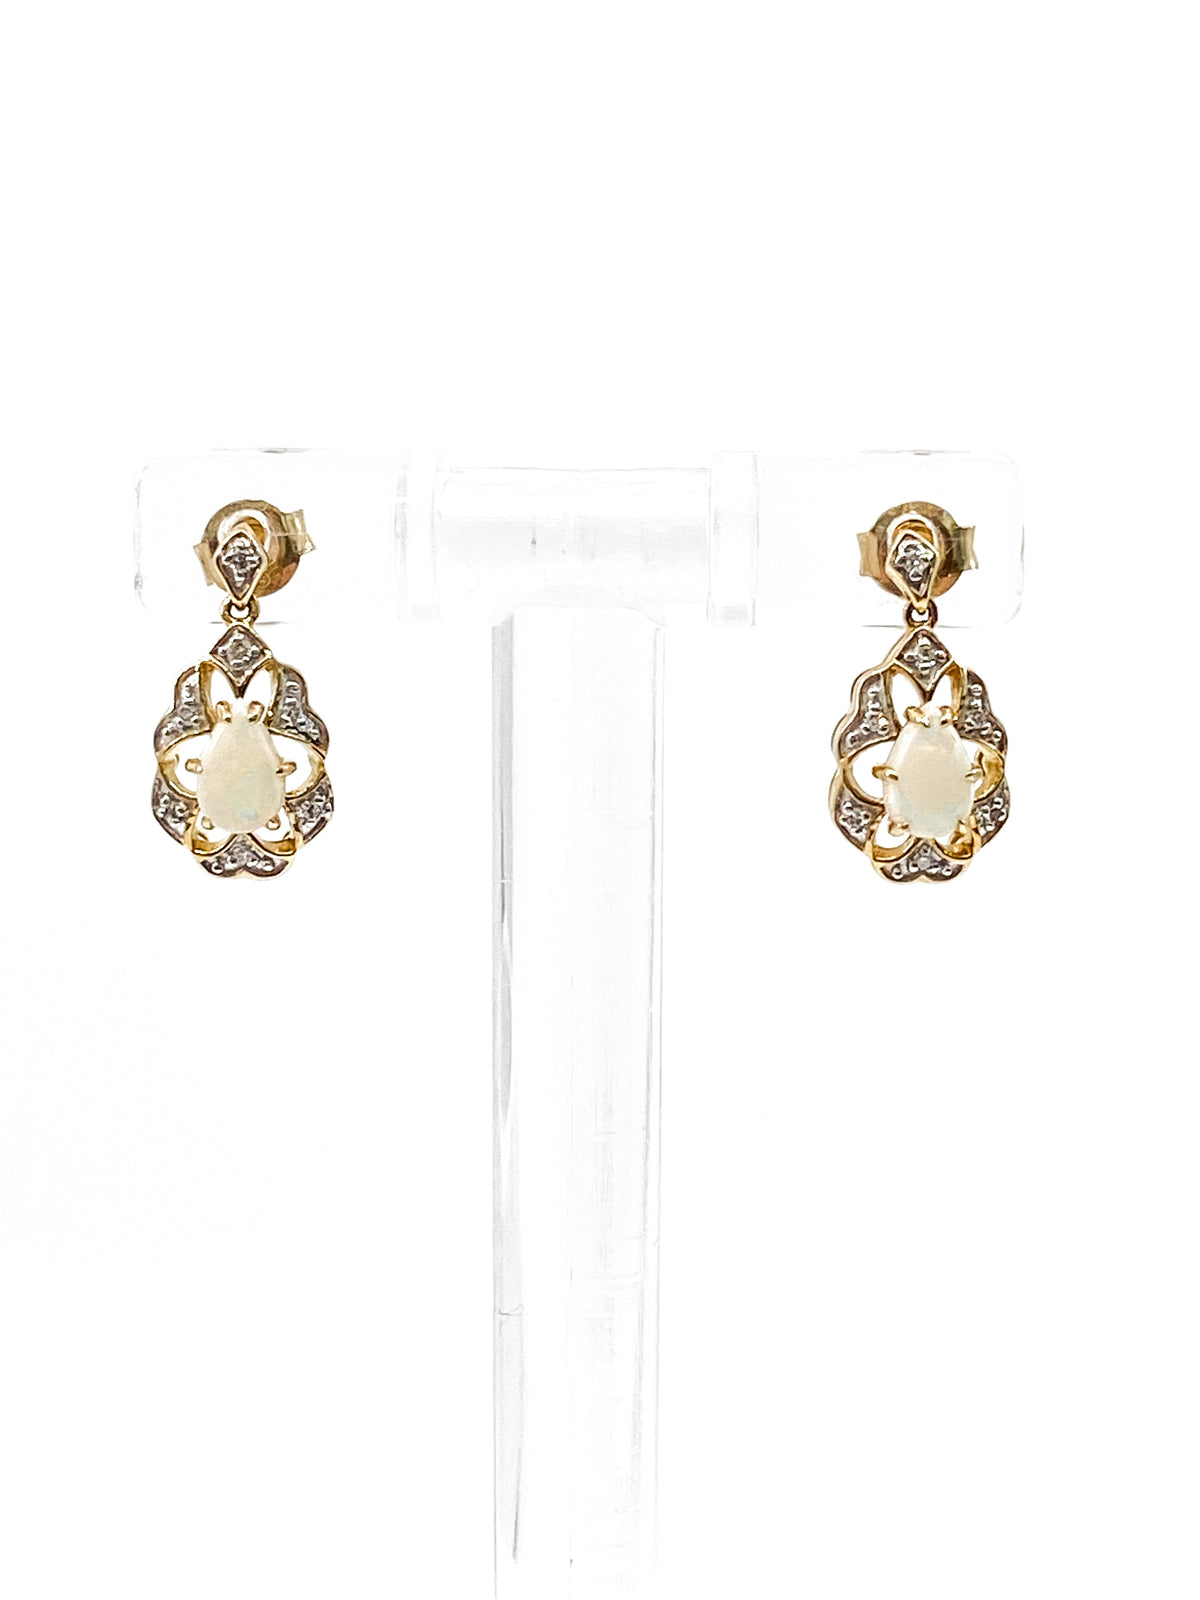 10K Yellow Gold 0.50cttw Genuine Opal and 0.06cttw Diamond Earrings